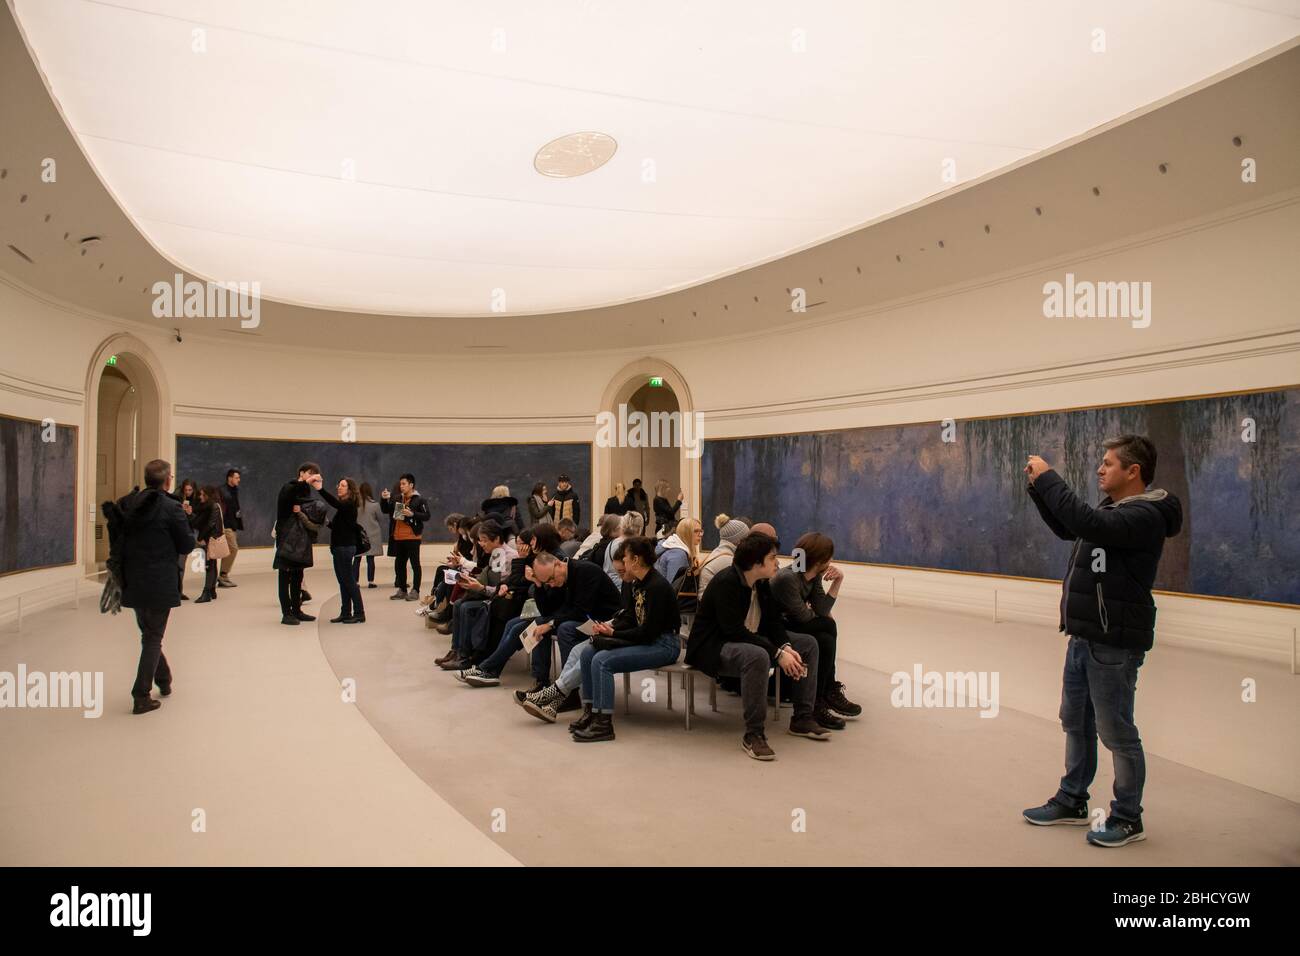 Musée de l'Orangerie, Paris, France was full of tourists on 28th of February just days before the city went into lockdown due to Coronavirus outbreak Stock Photo